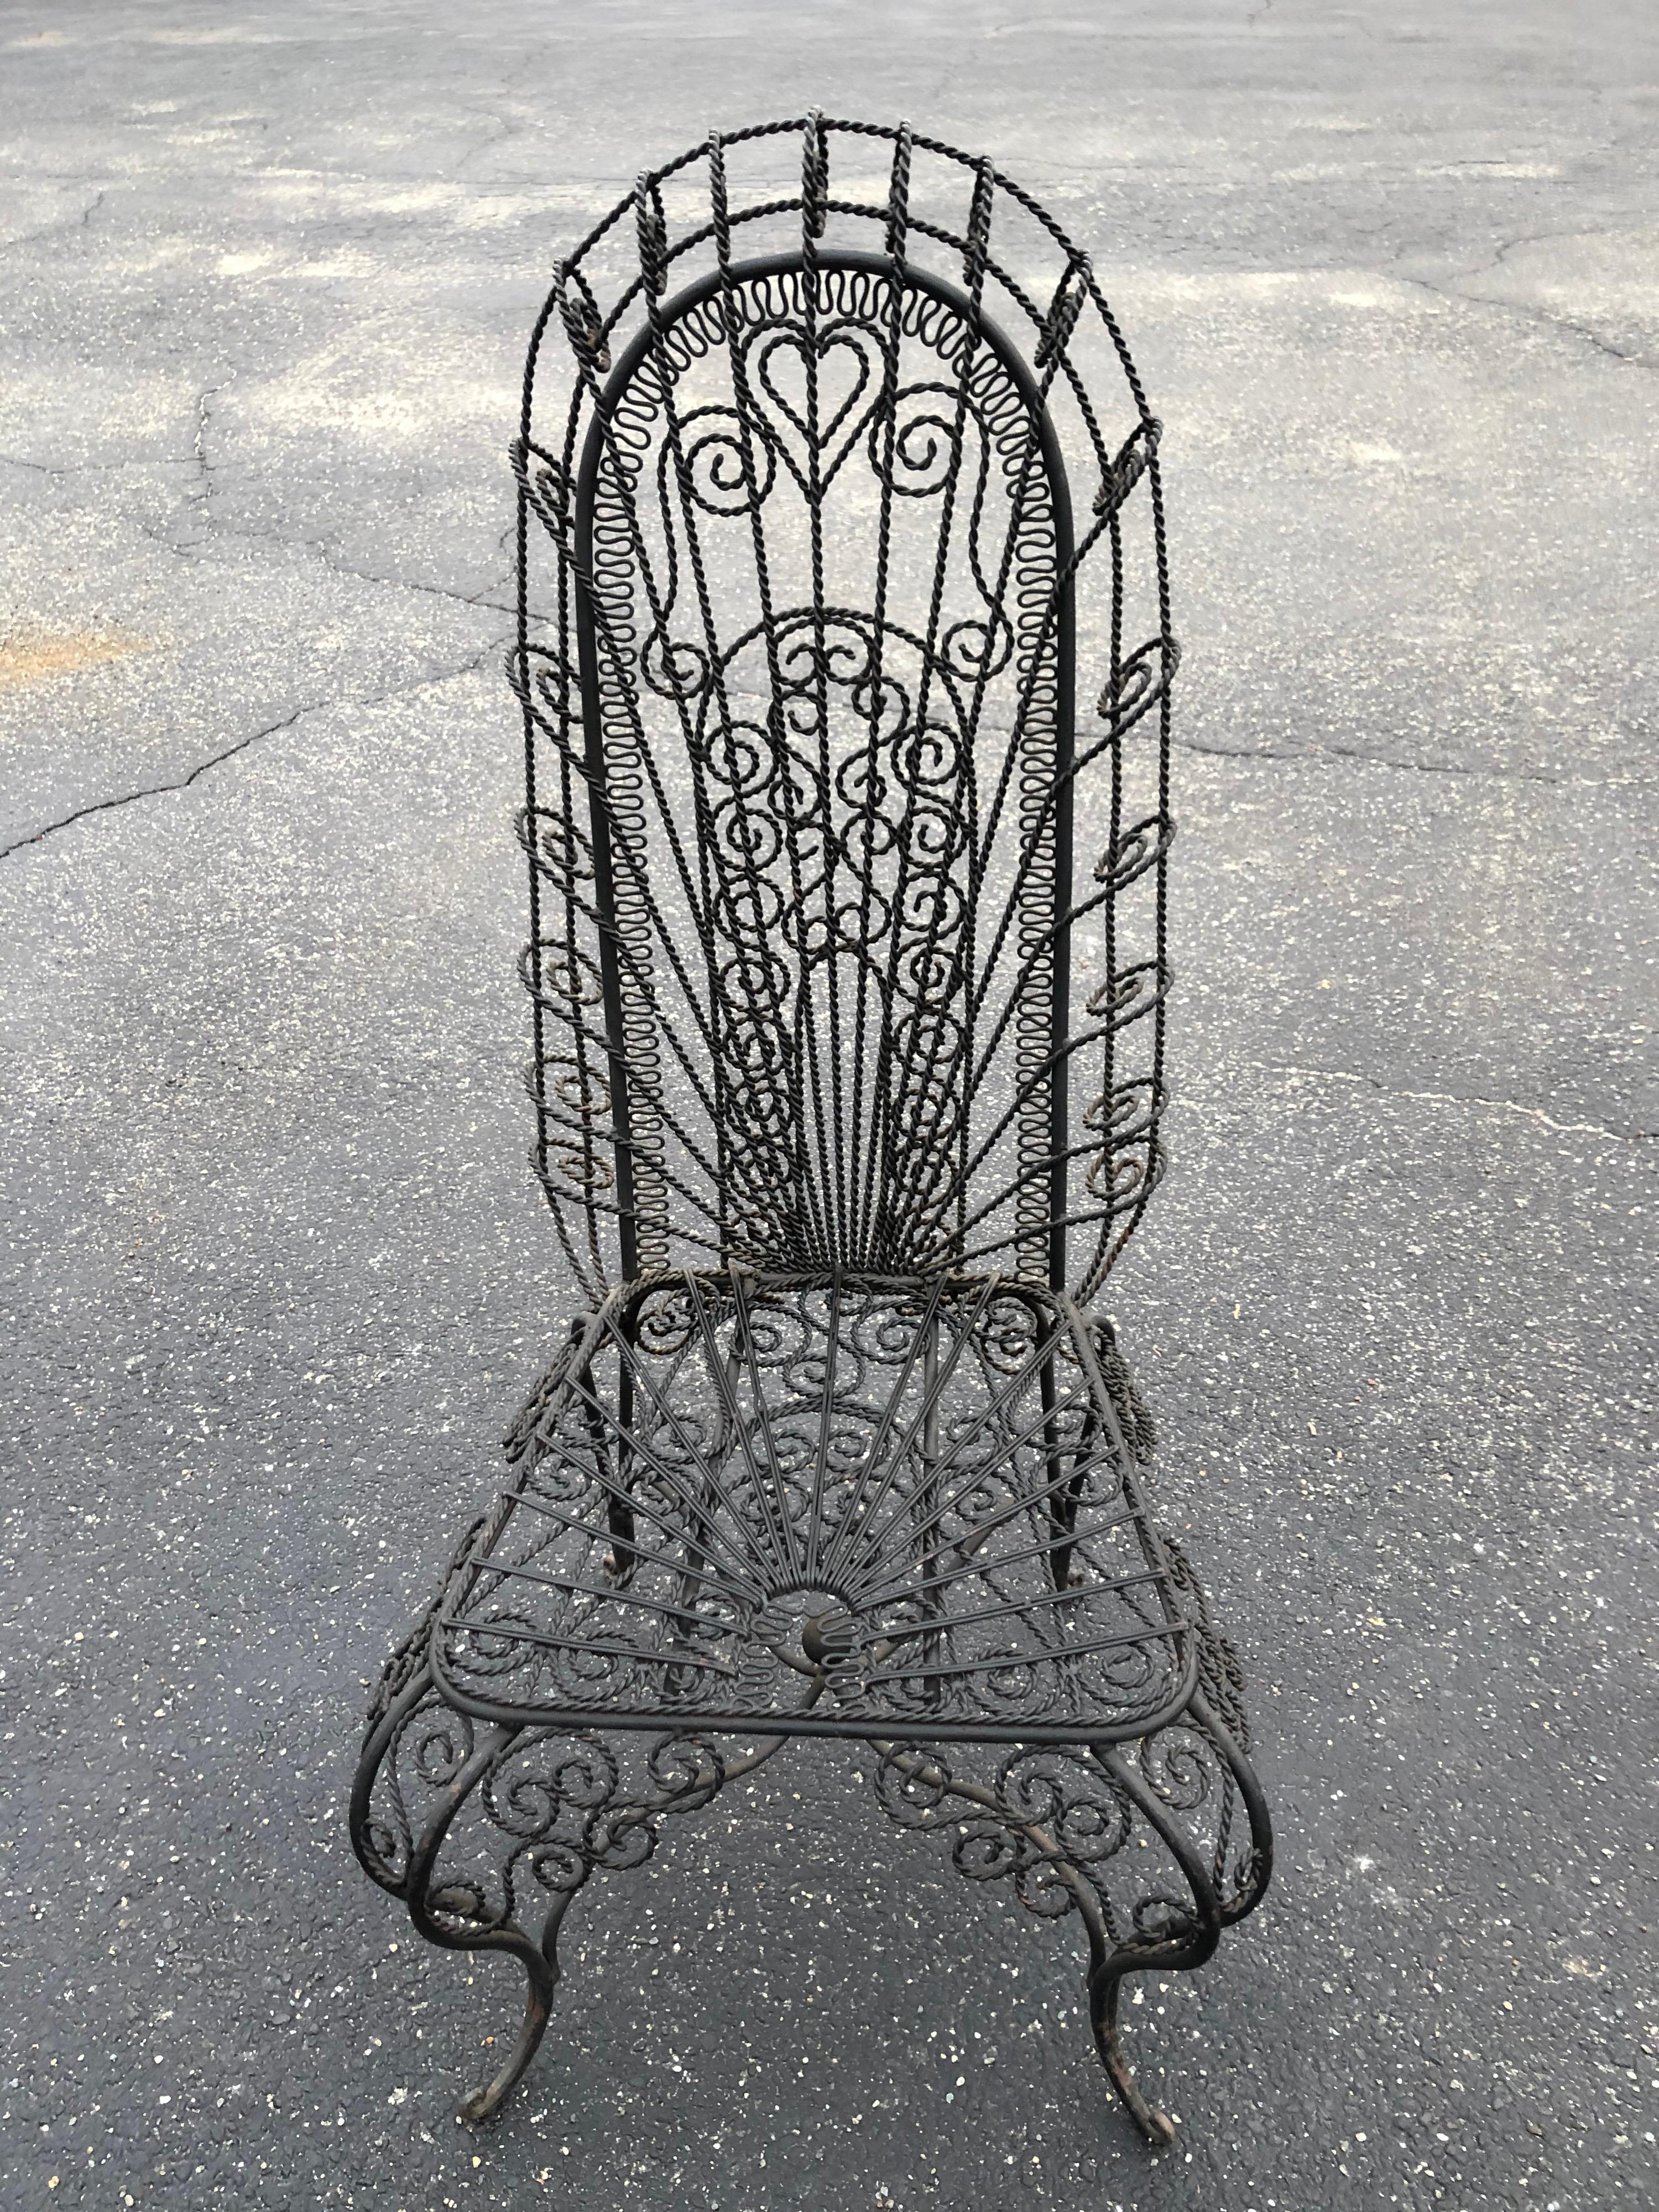 Vintage Hollywood Regency High Back Iron Peacock Chair. Possibly Spanish revival era from the 1960s when Mediterraneum was so in style. Intricate handwrought weaved black iron chair with heart designs. Perfect accent piece for an entryway or patio.